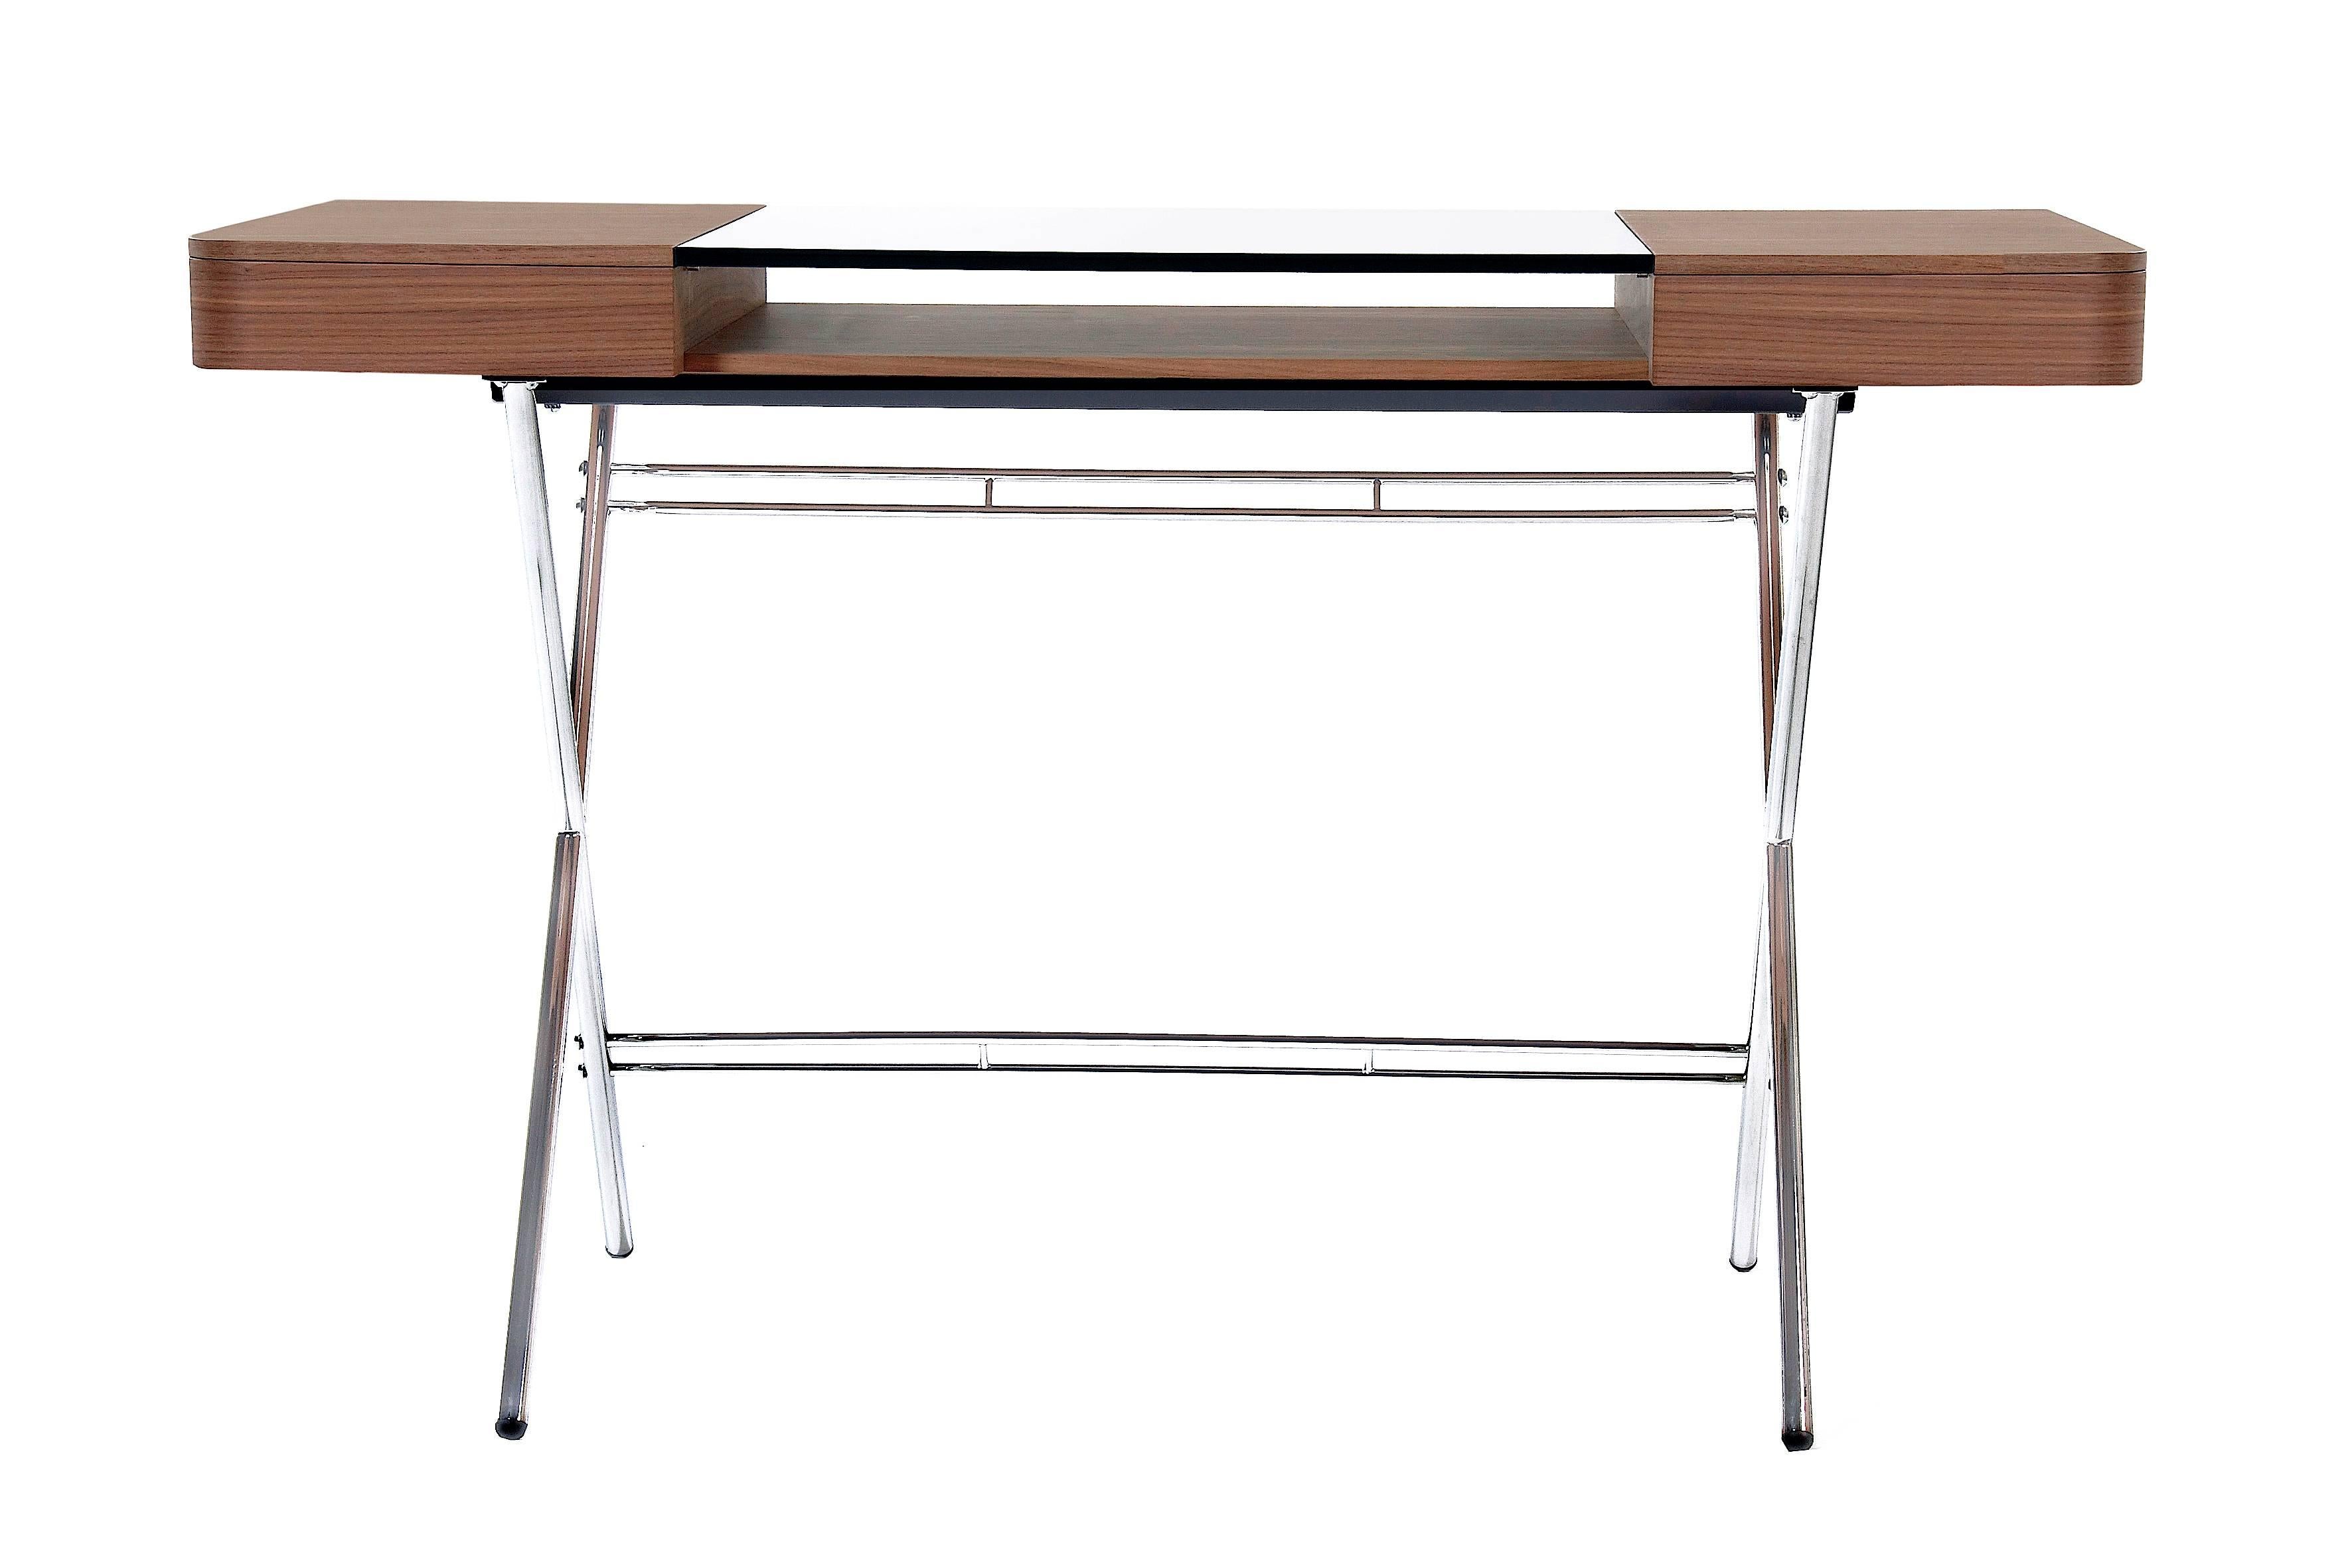 Cosimo desk was designed by the architect Marco Zanuso Jr for luxury French furniture brand, Adentro Paris. Ideal for a contemporary home office space, Cosimo desk comes in various finishes.
The desk is composed of a central glass panel with a